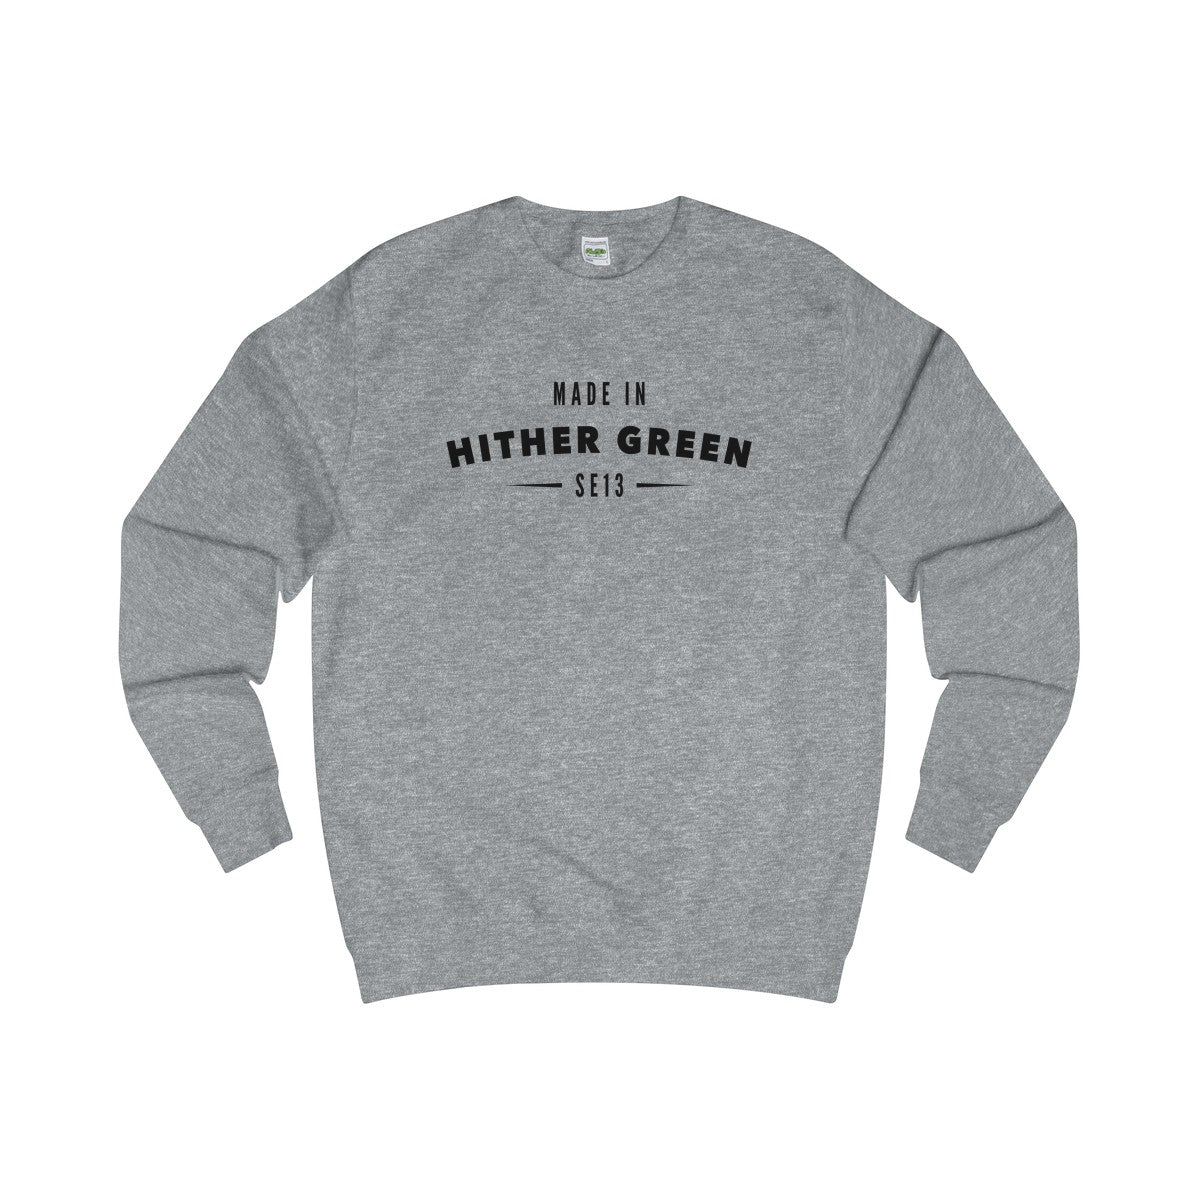 Made In Hither Green Sweater